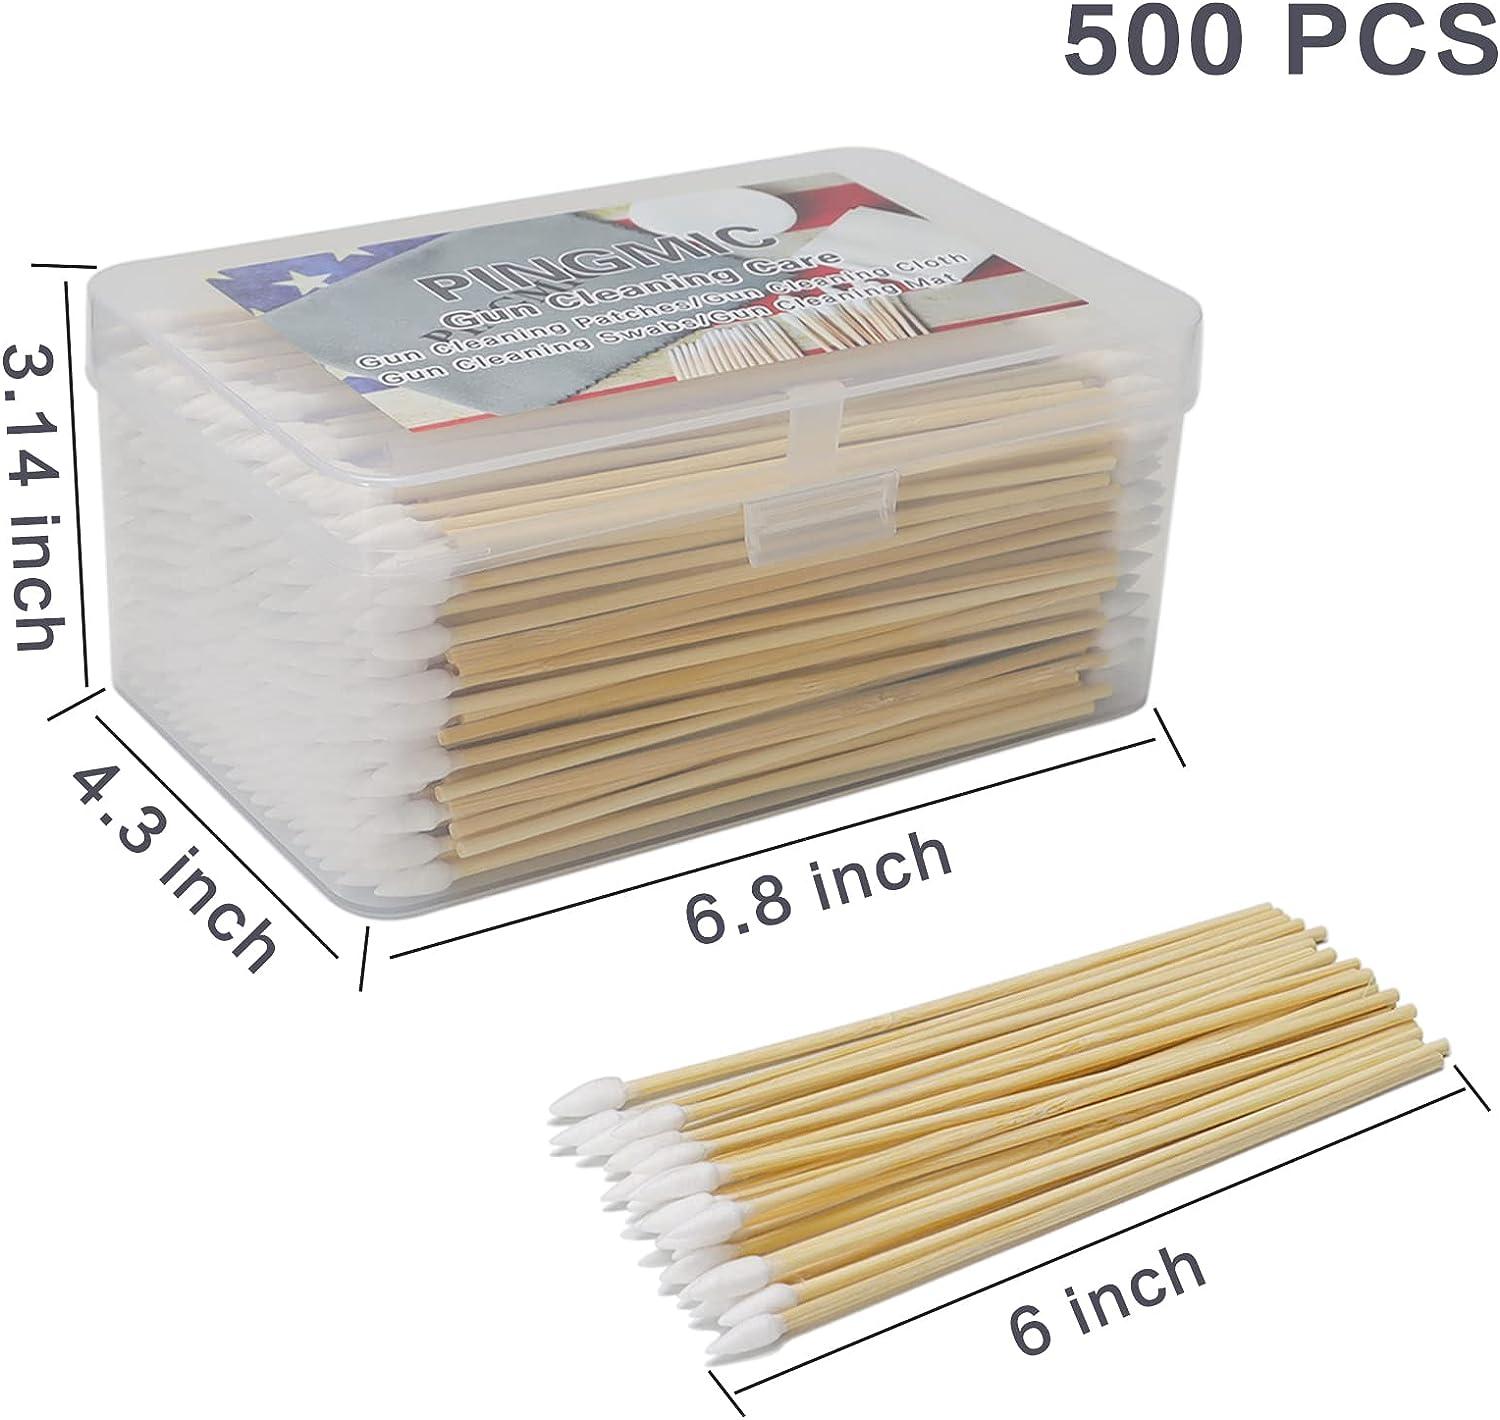 500PCS Precision Gun Cleaning Swabs, 6 Inch Pointed Cotton Swabs with  Storage Case - Lint Free Sturdy Cotton Swabs with Bamboo Handle - Long Cotton  Swab for Gun Cleaning, Makeup, Electronic